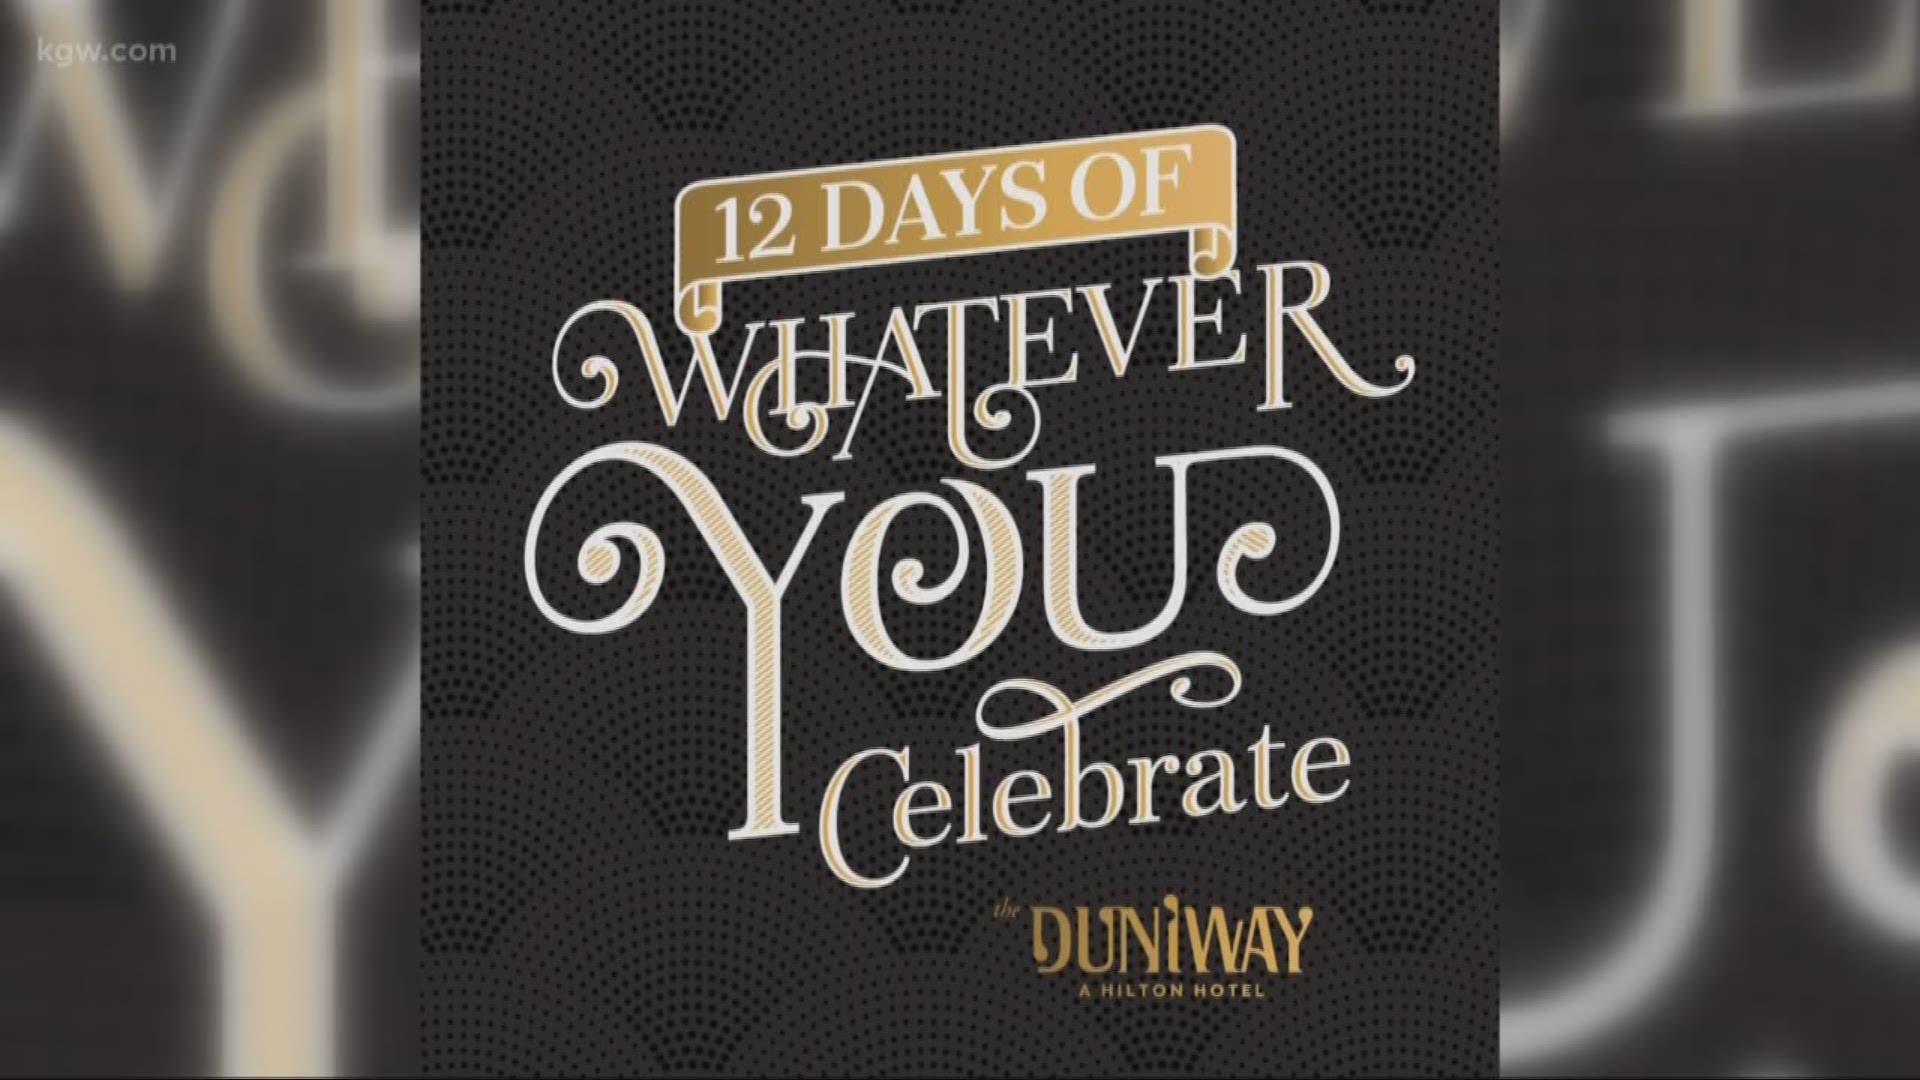 Find a fun event to celebrate and shop at the Duniway Hotel as Christmas approaches.

duniwayhotel.com

#TonightwithCassidy